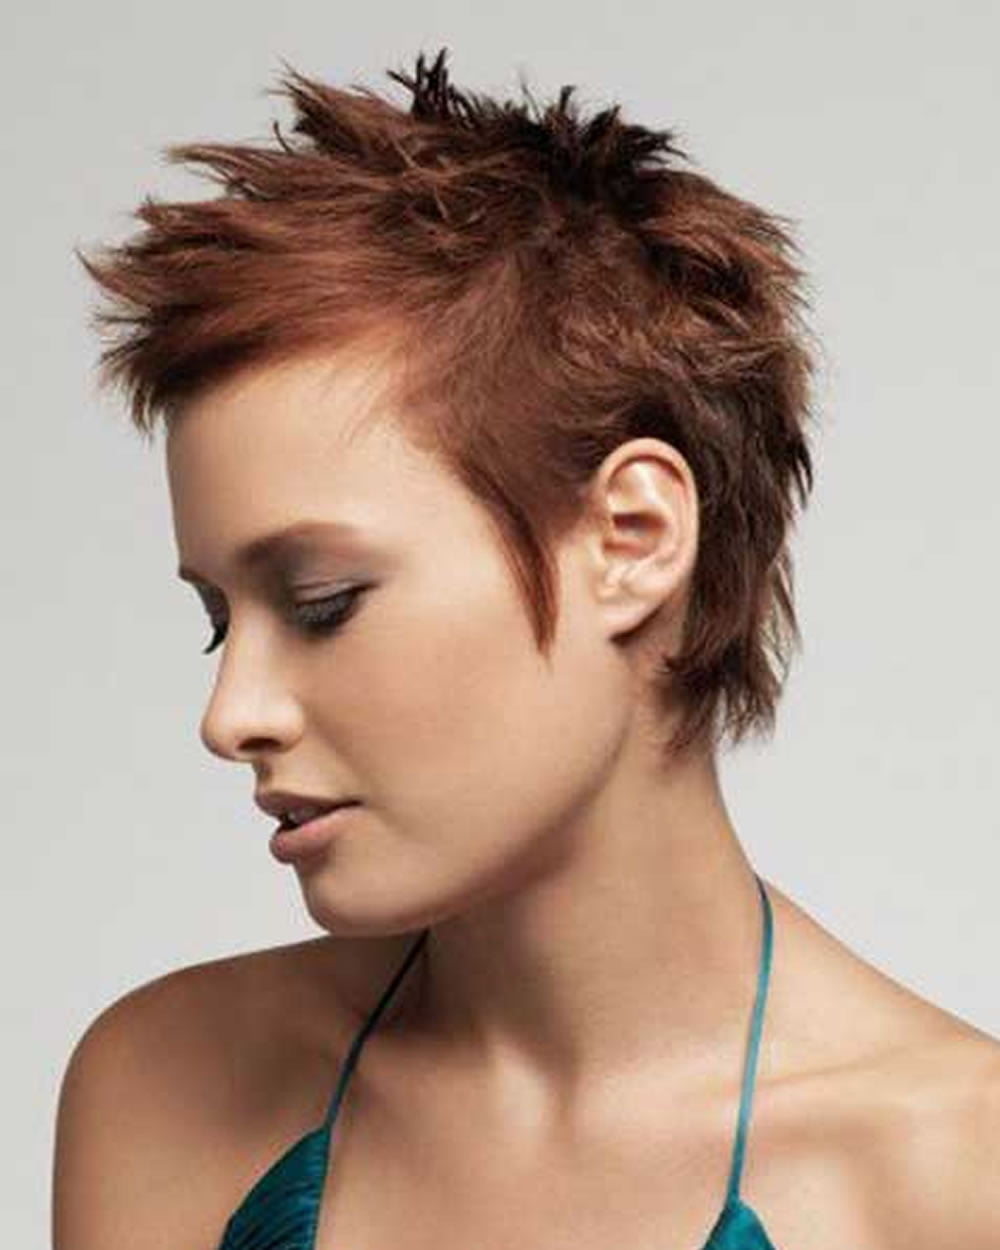 Short Spiky Haircuts & Hairstyles for Women 2018 - Page 5 ...